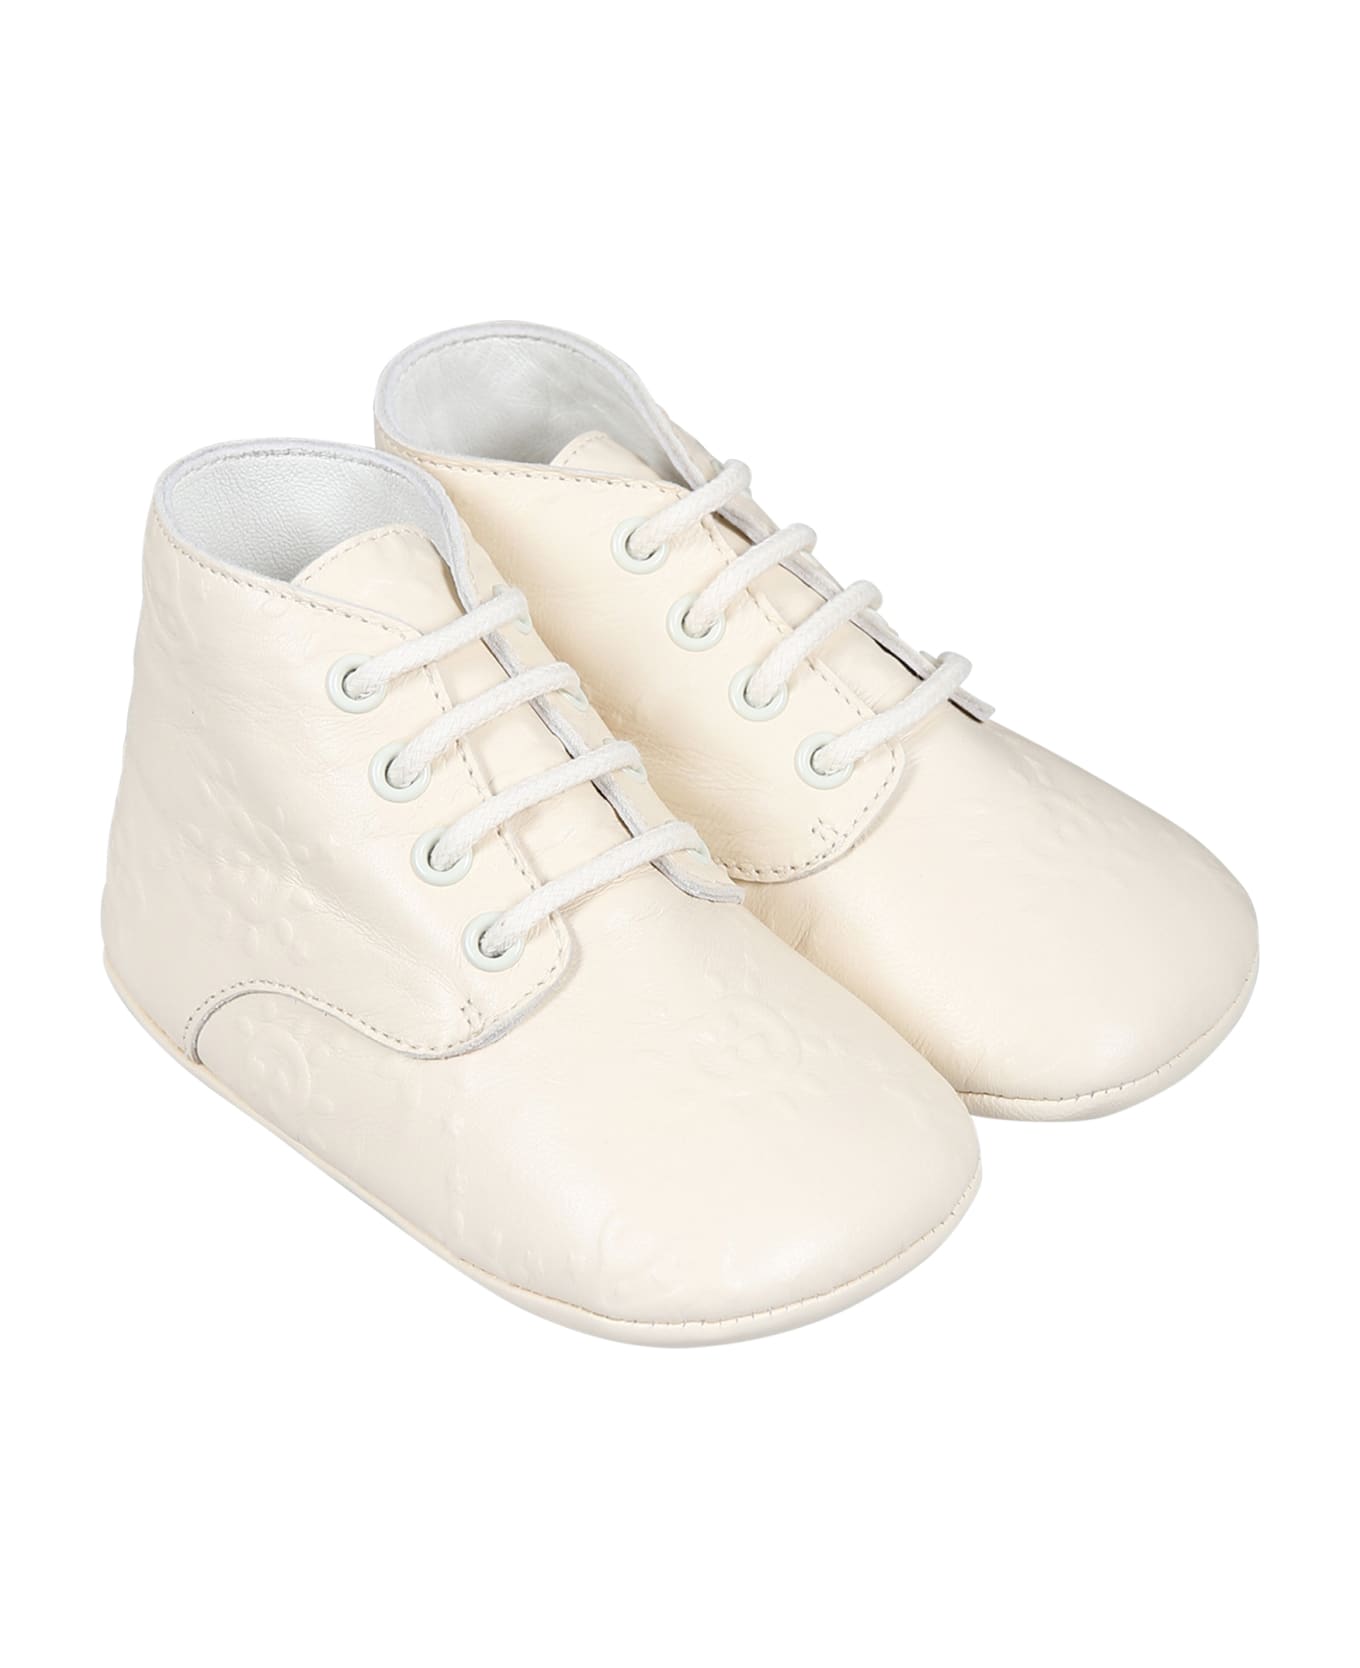 Gucci Ivory Shoes For Baby Kids With Gg Cross And Ufo - Ivory